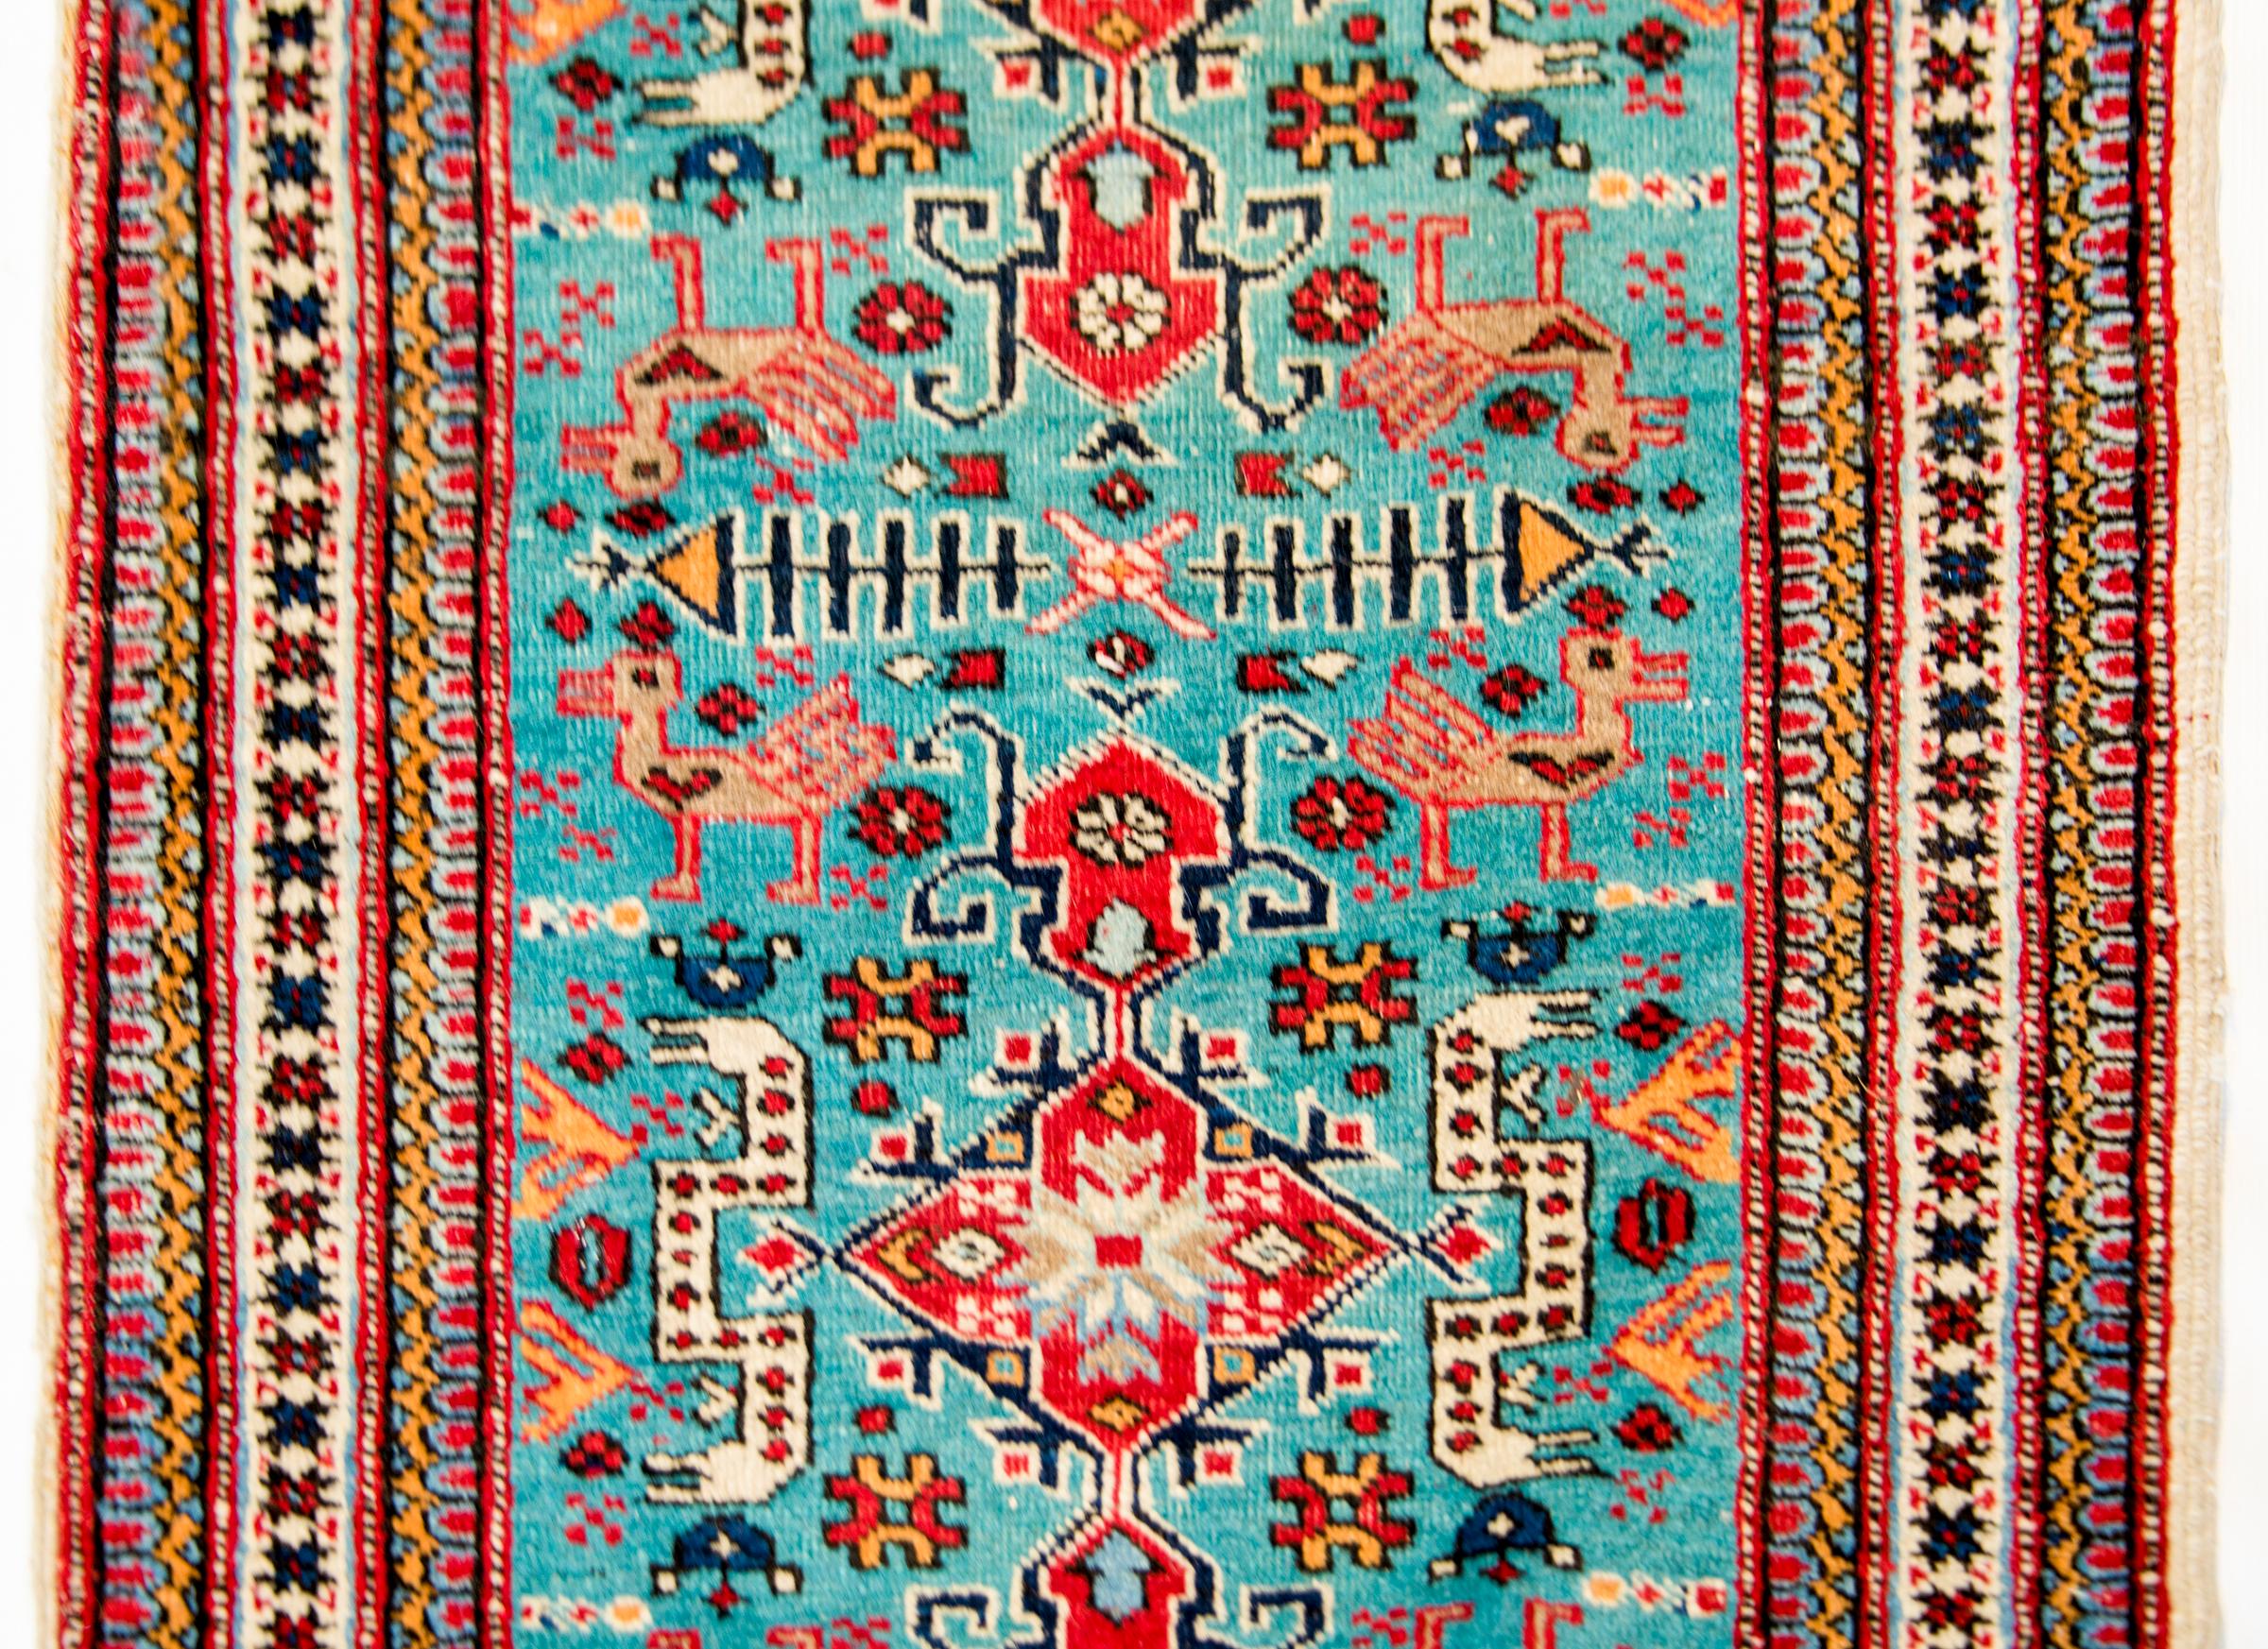 A lovely and whimsical early 20th century Russian Shirvan rug with a pattern containing large red diamond medallions on a turquoise ground amidst a field of birds, snakes, and stylized flowers. The border is complex with multiple stylized floral